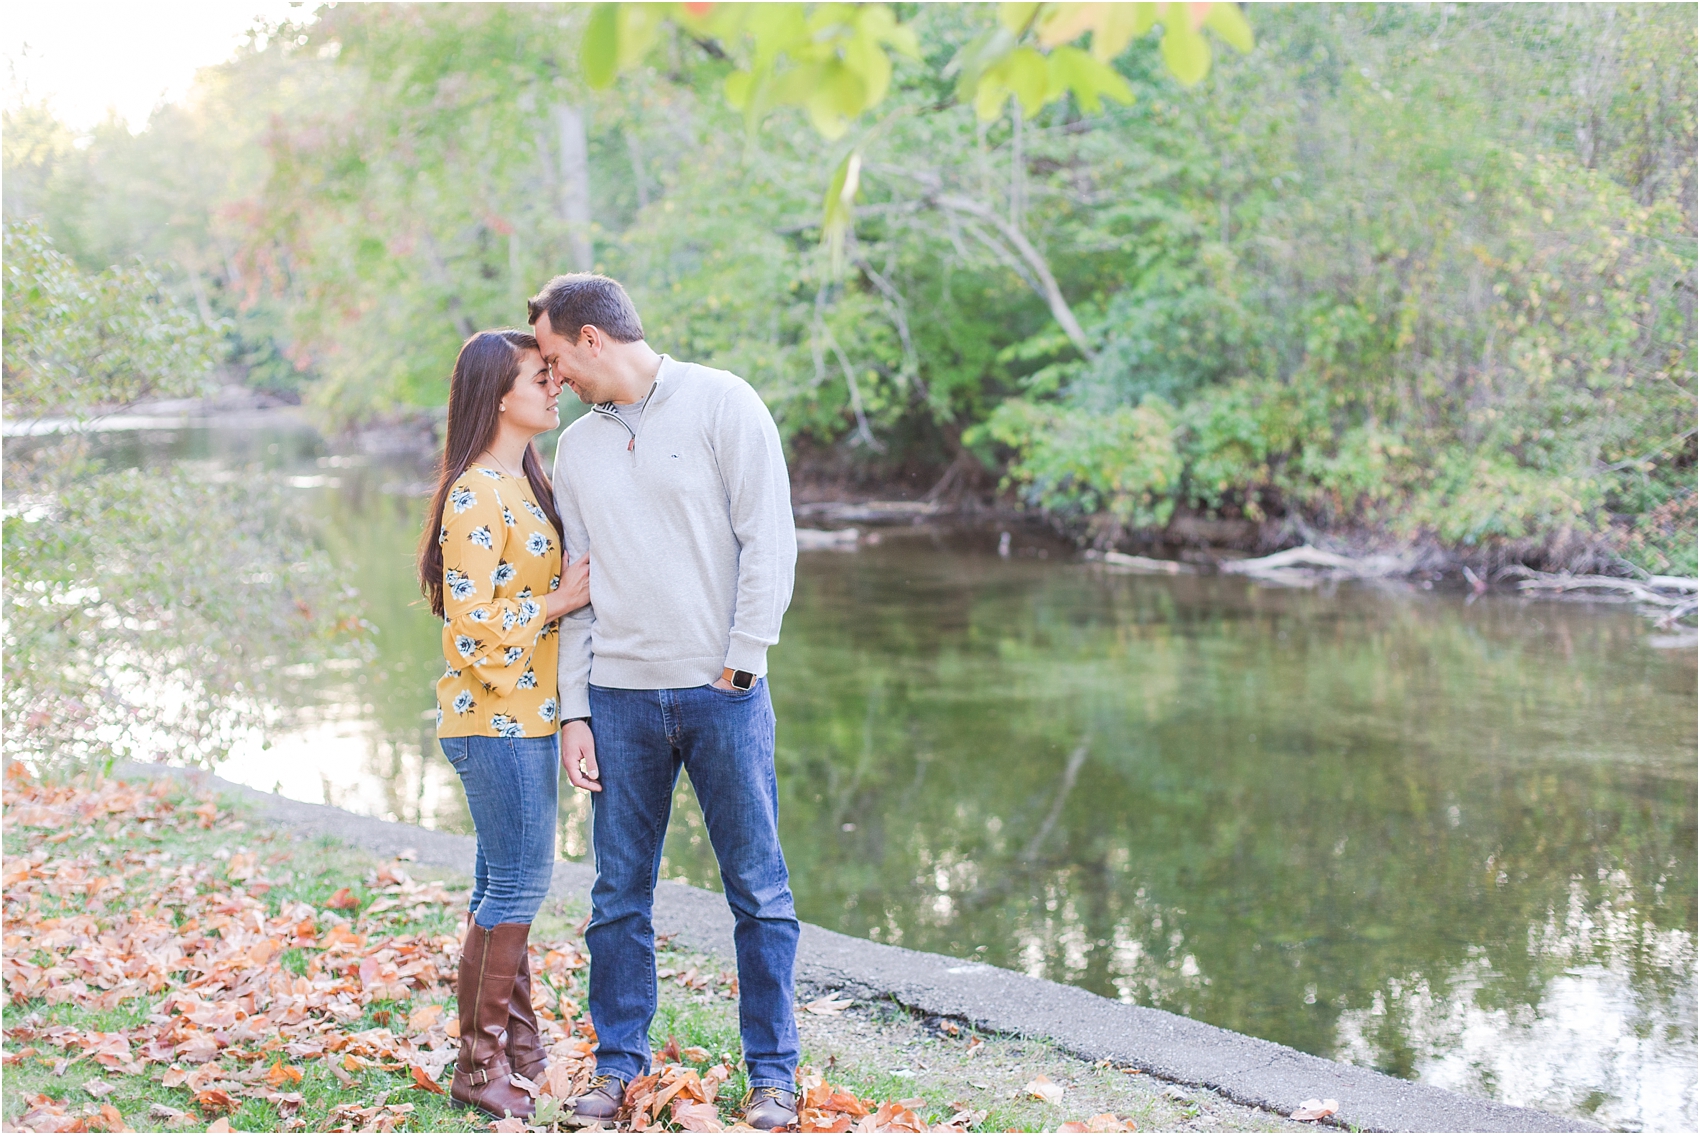 relaxed-autumn-engagement-photos-at-hudson-mills-metropark-in-dexter-mi-by-courtney-carolyn-photography_0019.jpg